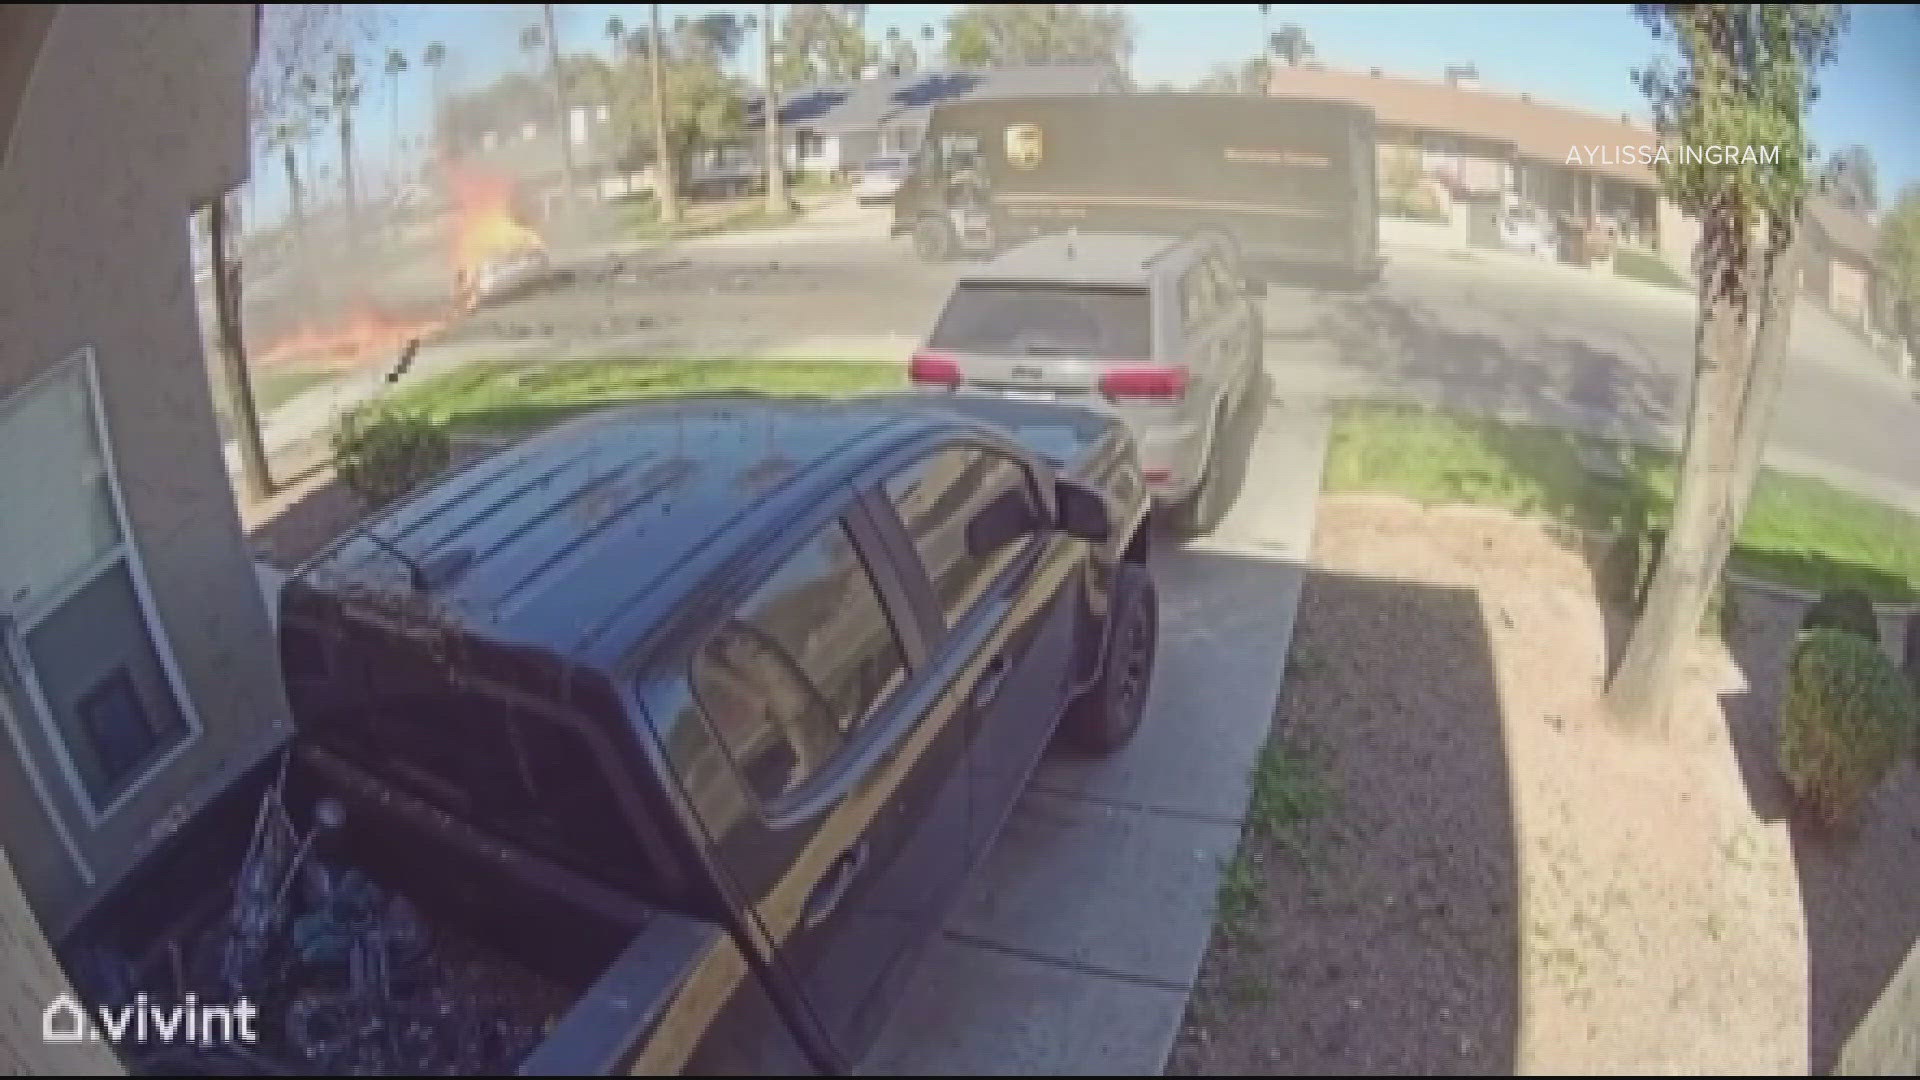 An arrest has been made in connection to a Phoenix shooting that led to a fiery crash.